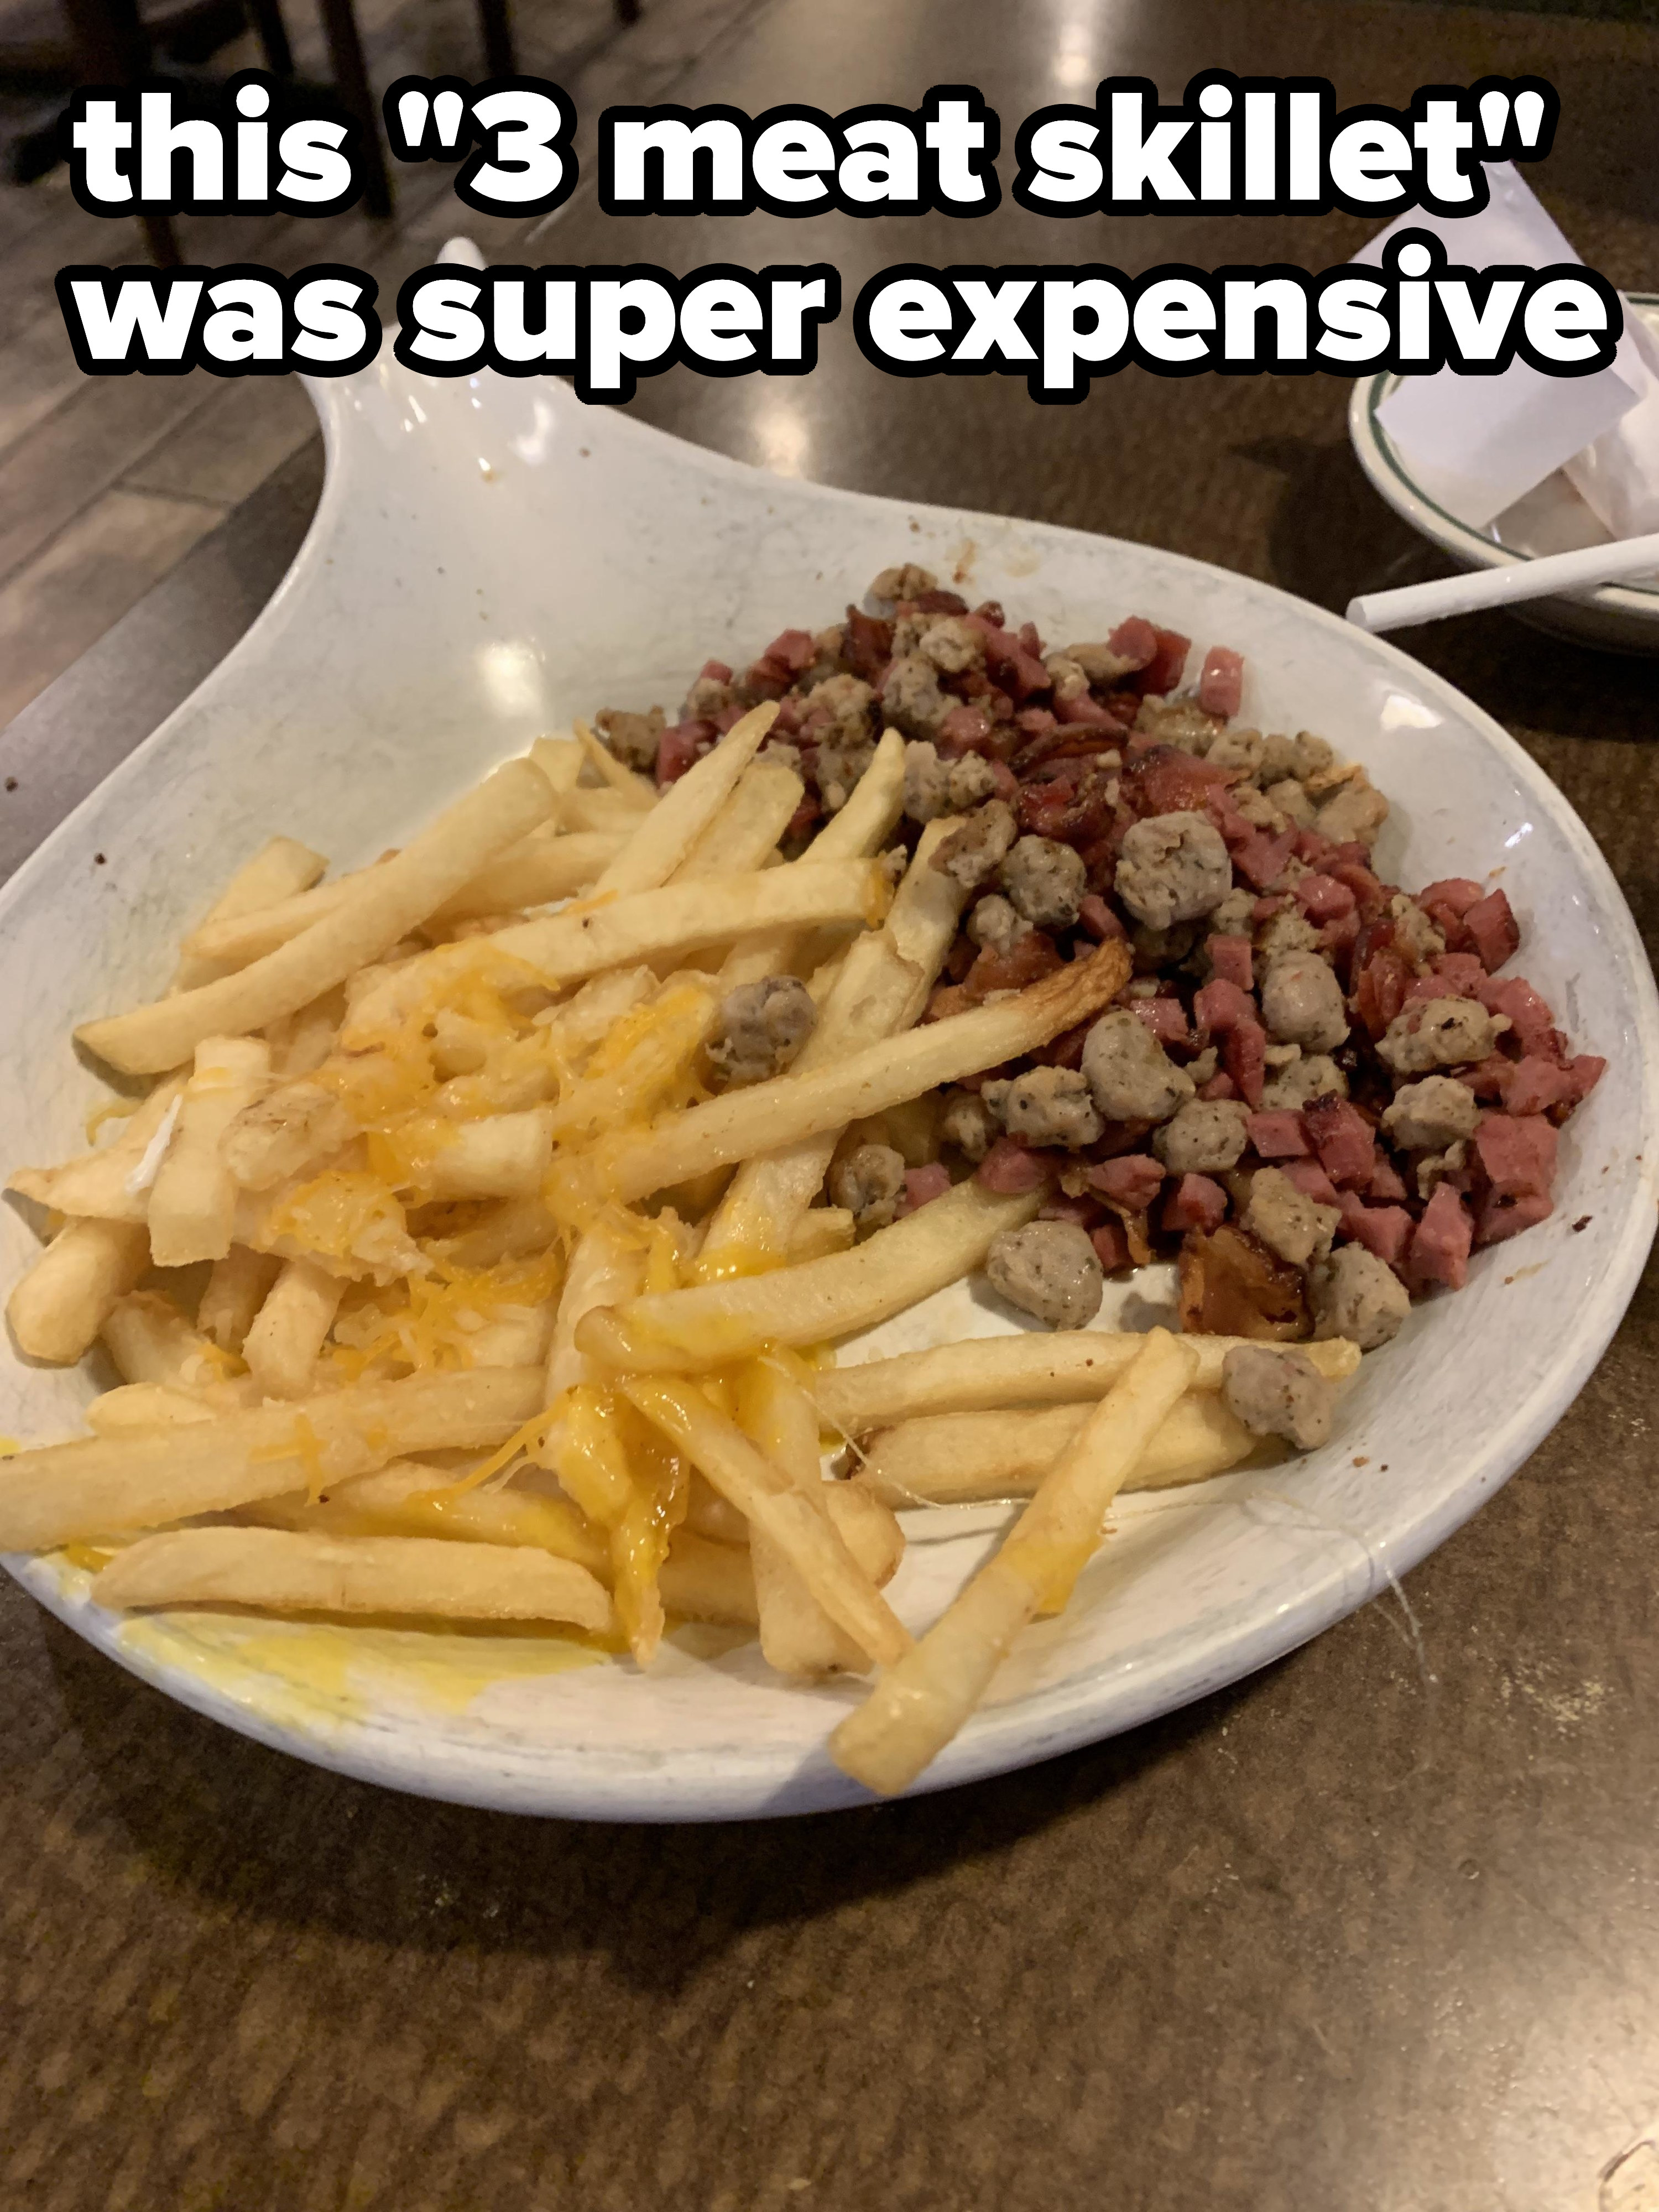 fries and cooked sausage